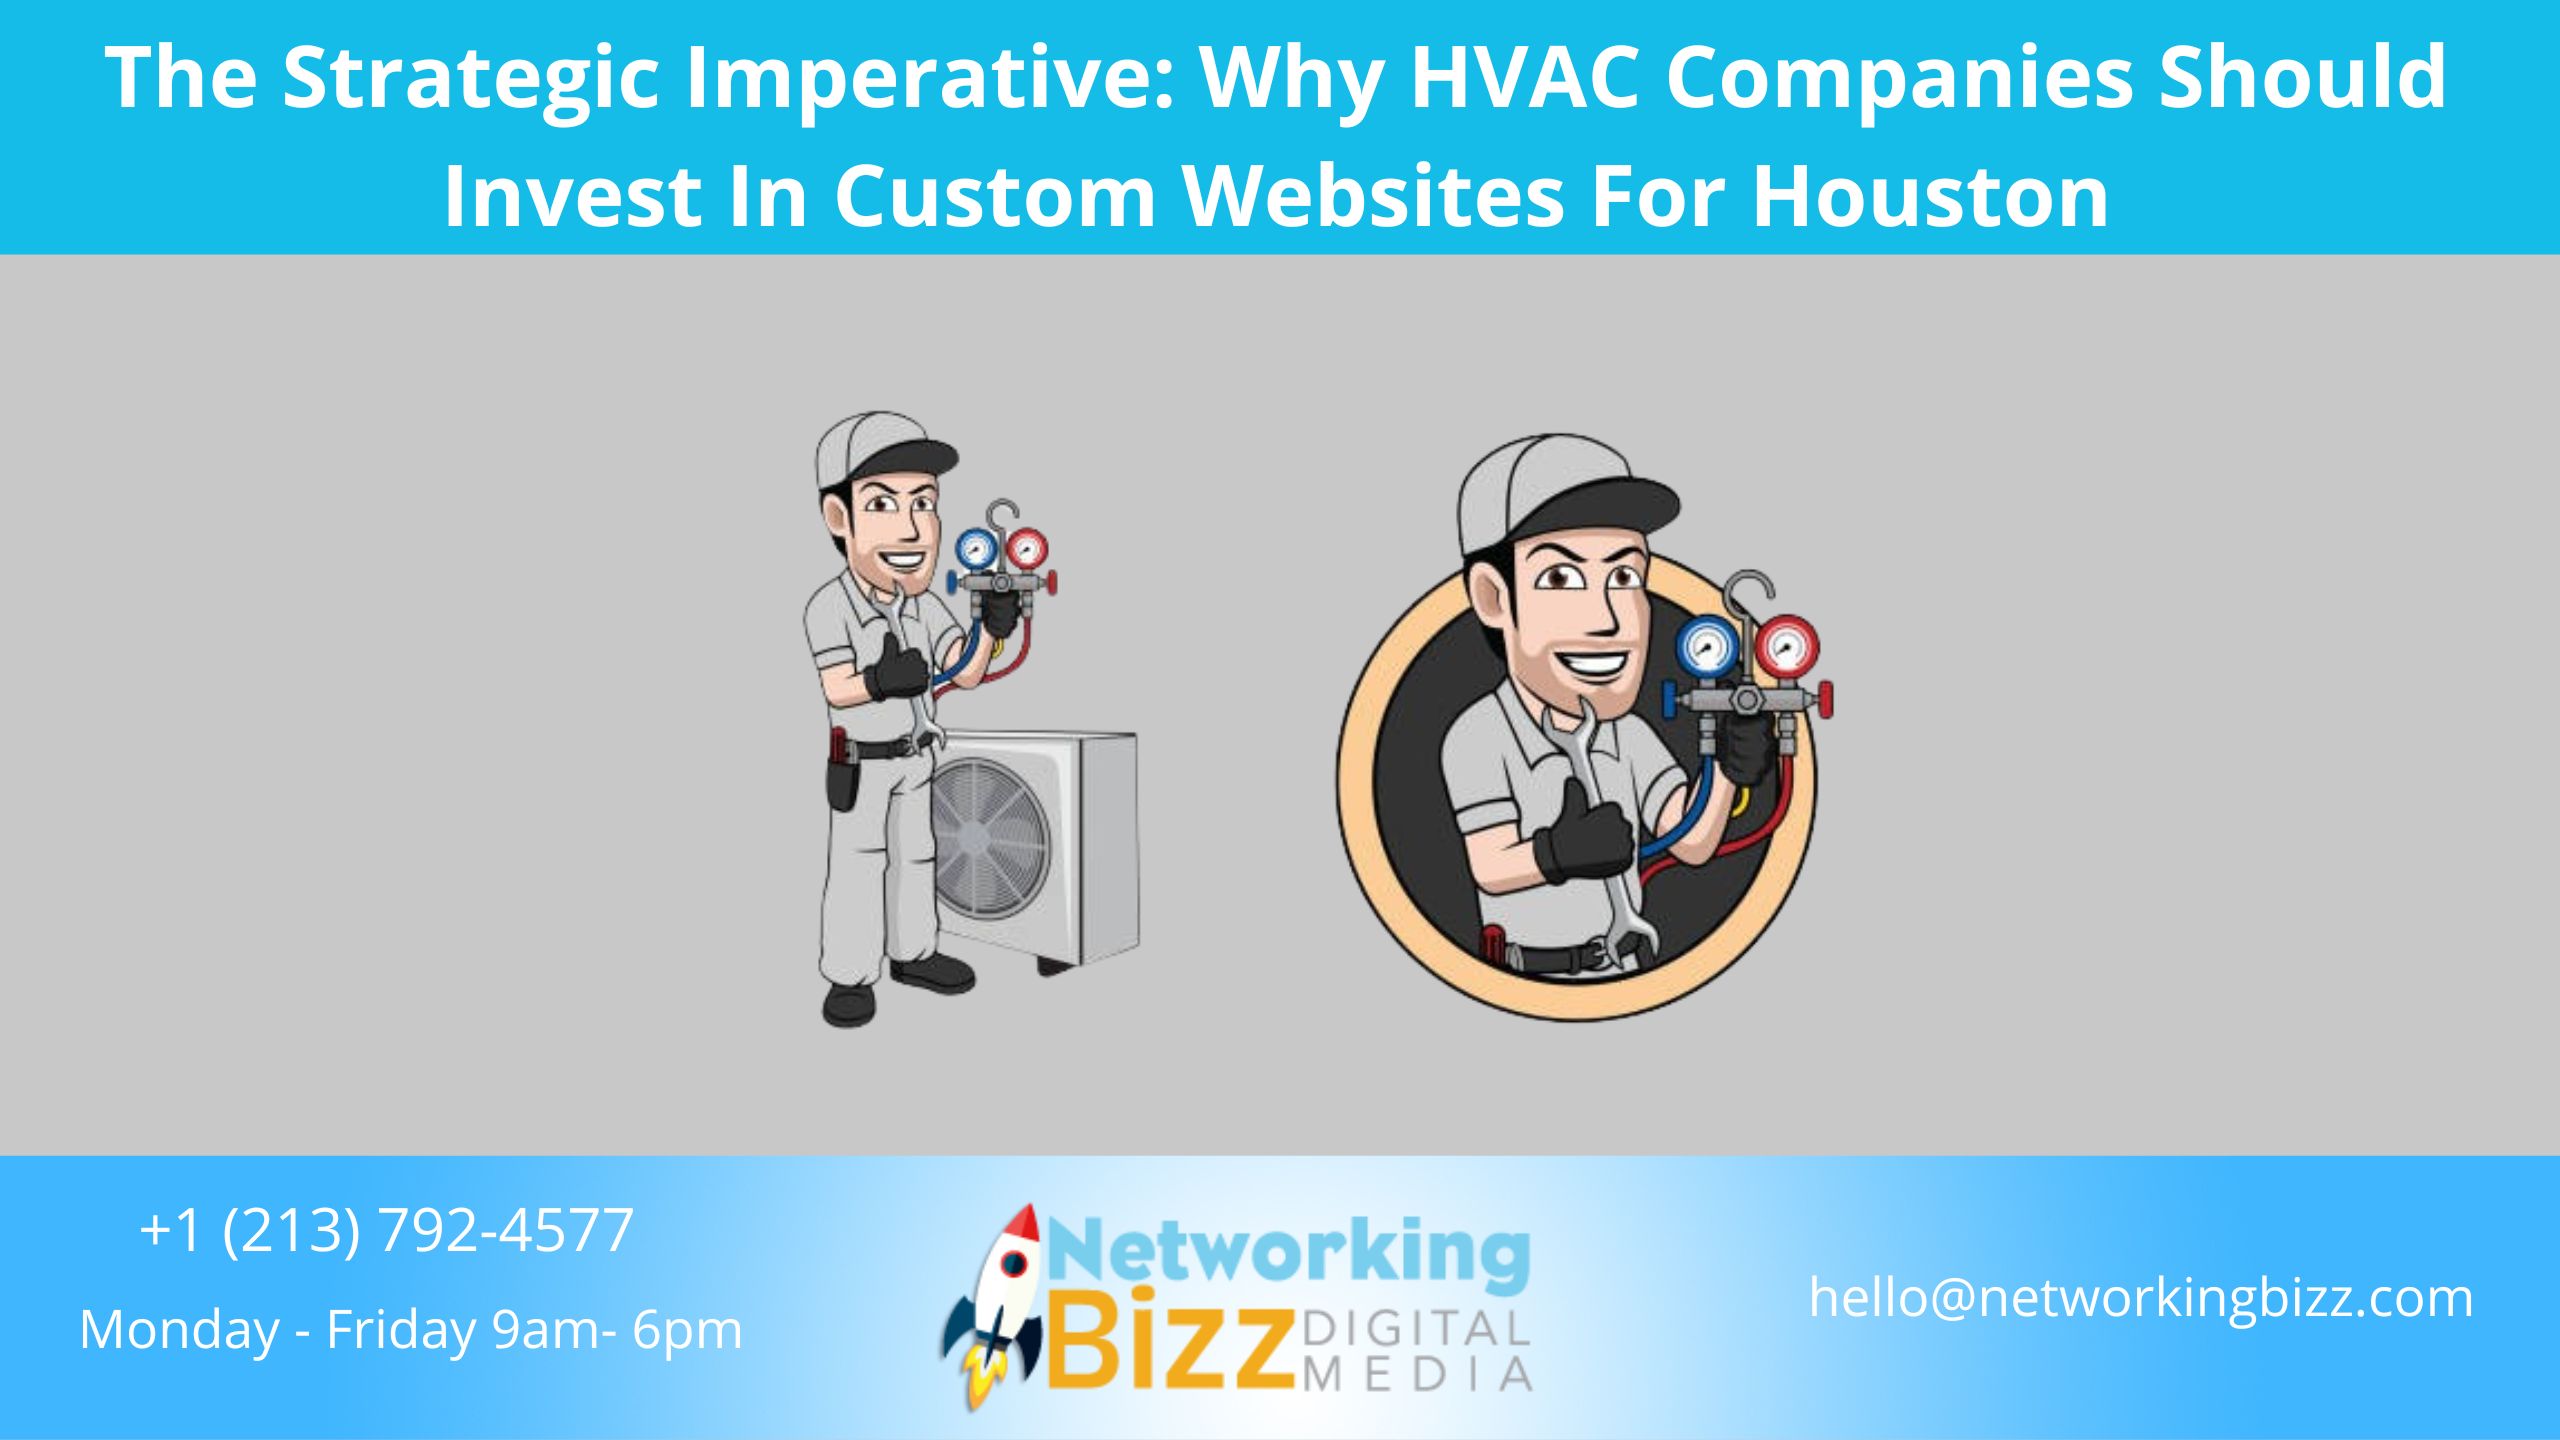 The Strategic Imperative: Why HVAC Companies Should Invest In Custom Websites For Houston  